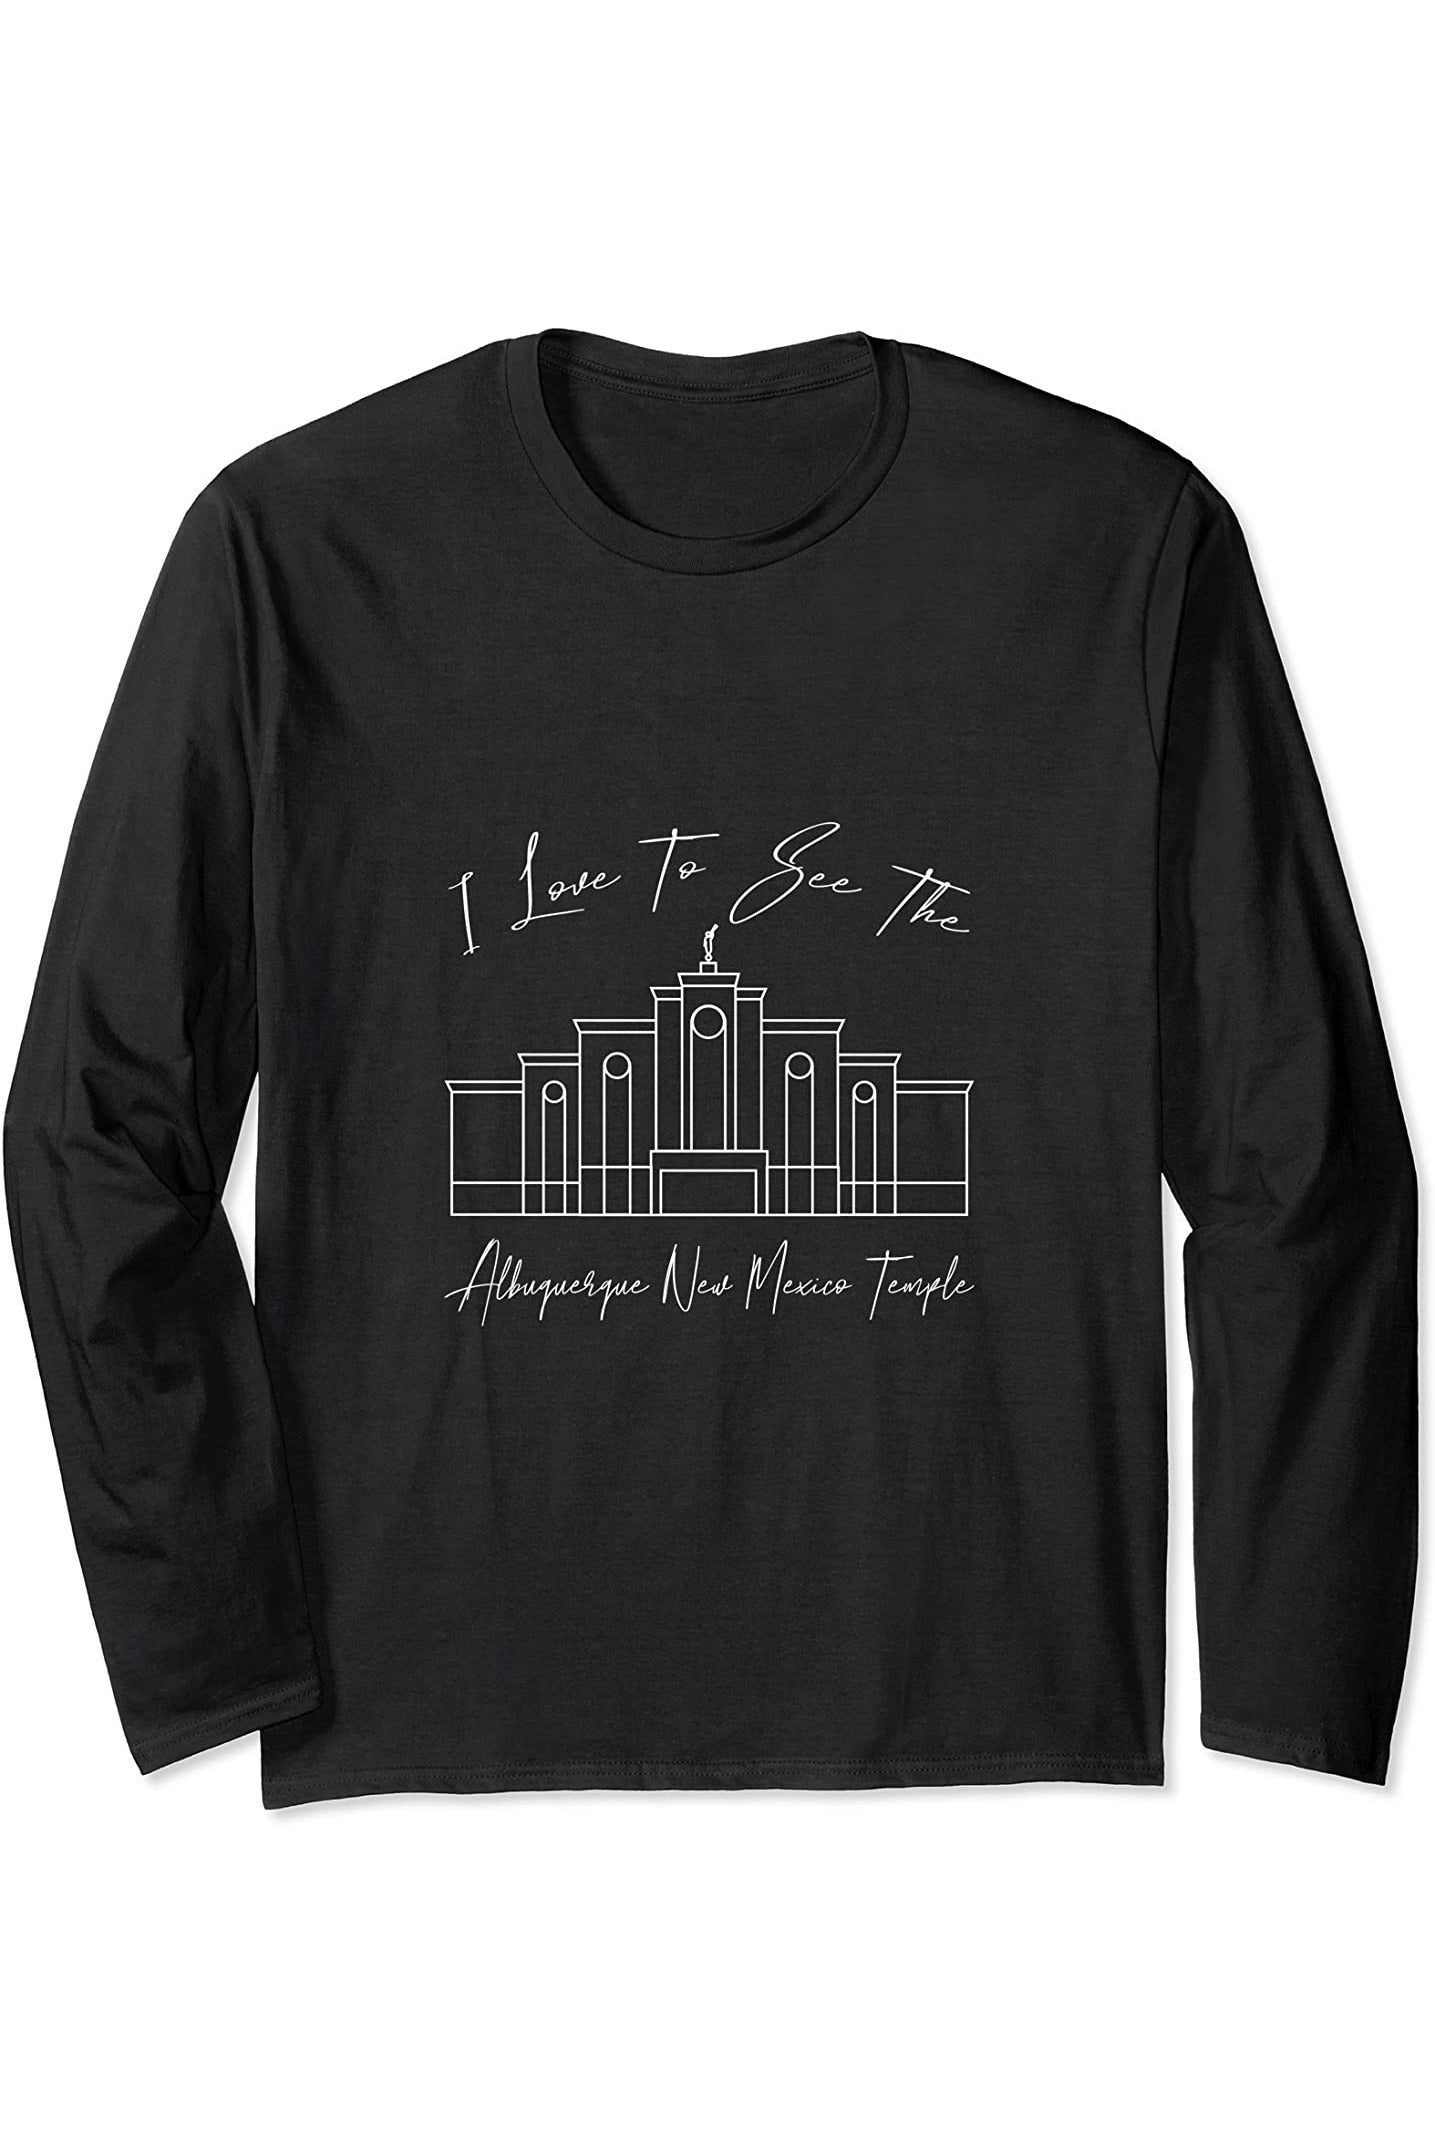 Albuquerque New Mexico Temple Long Sleeve T-Shirt - Calligraphy Style (English) US